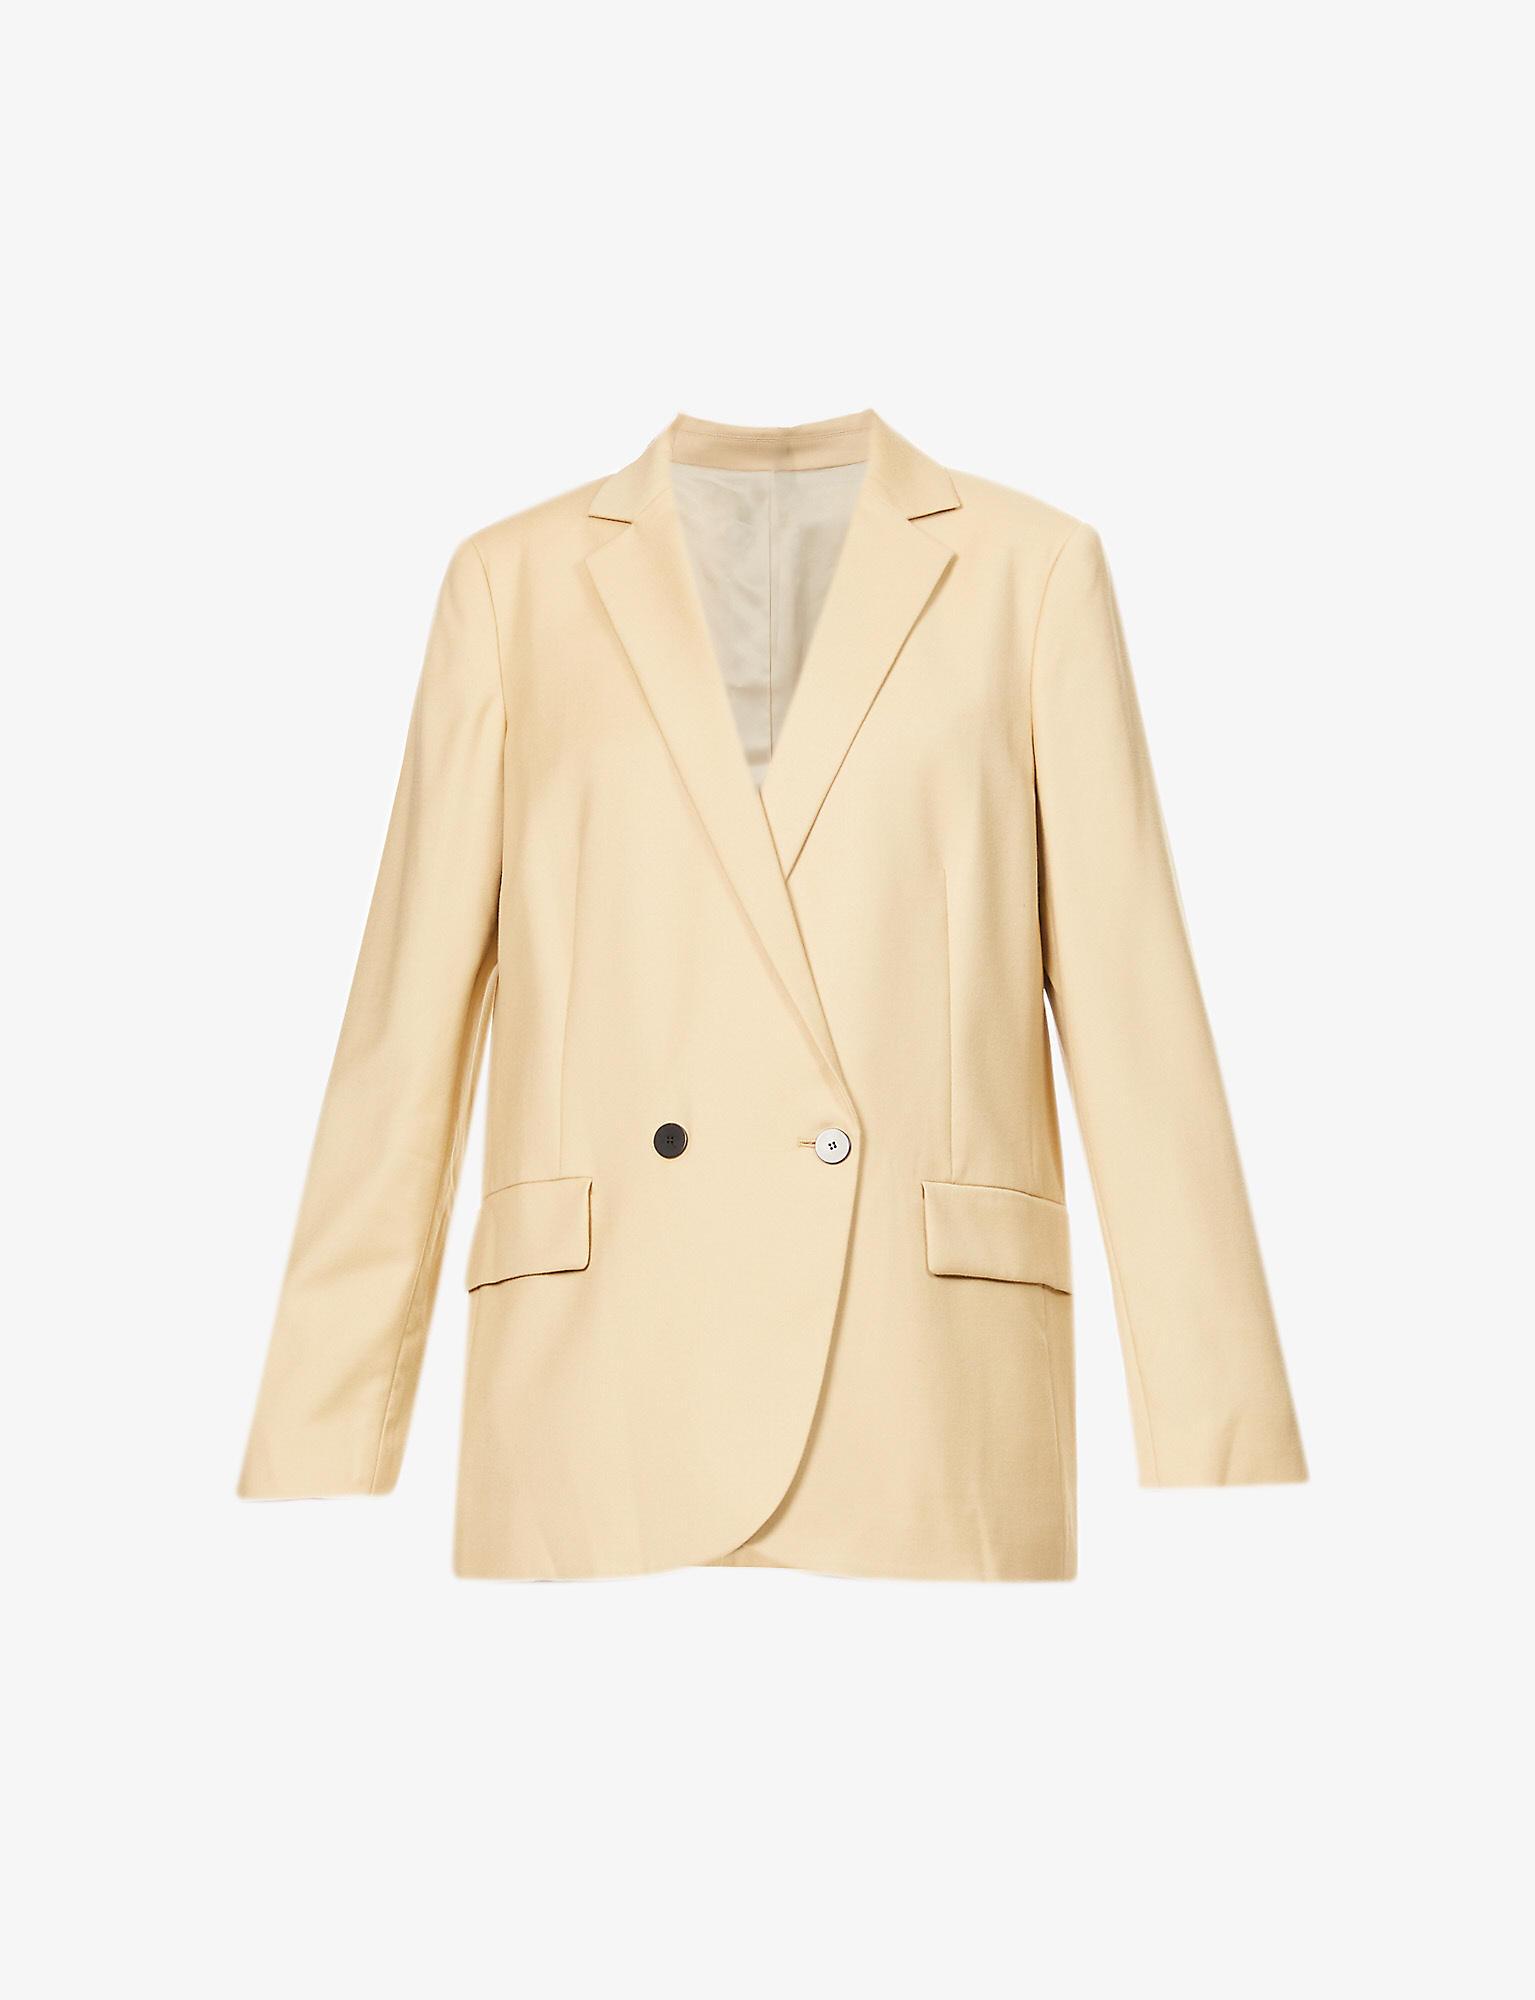 Theory Boy Double-breasted Regular-fit Wool Jacket in Natural | Lyst